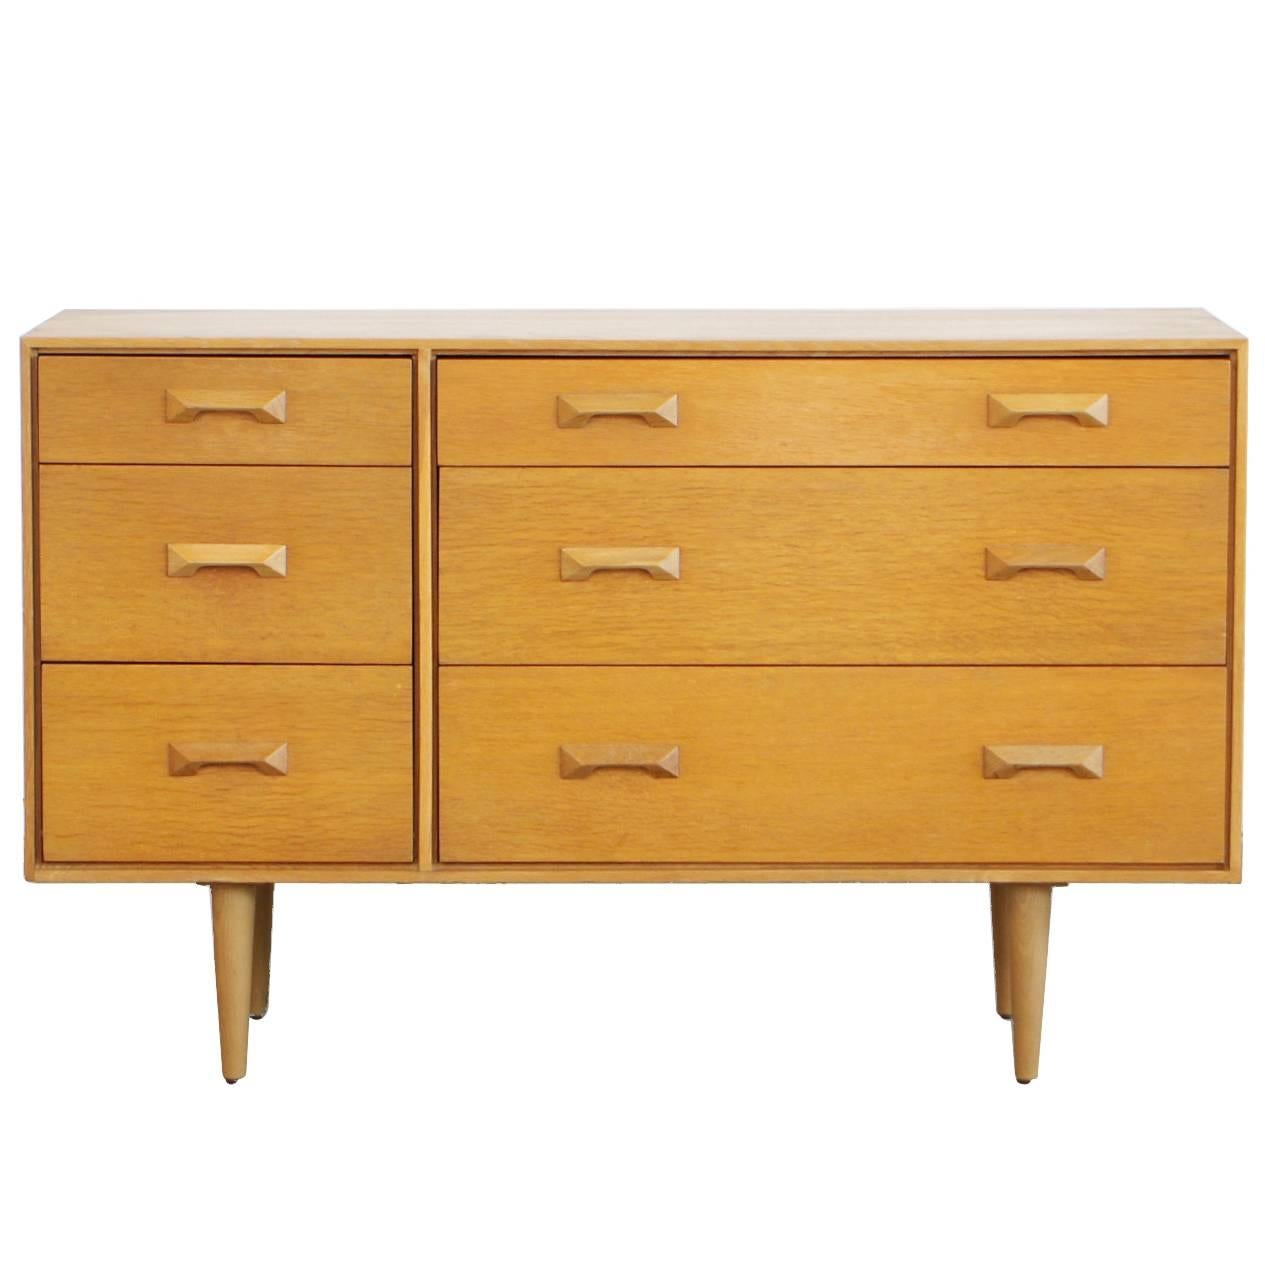 Oak Chest of Drawers by Sylvia & John Reid Stag Concorde, 1959